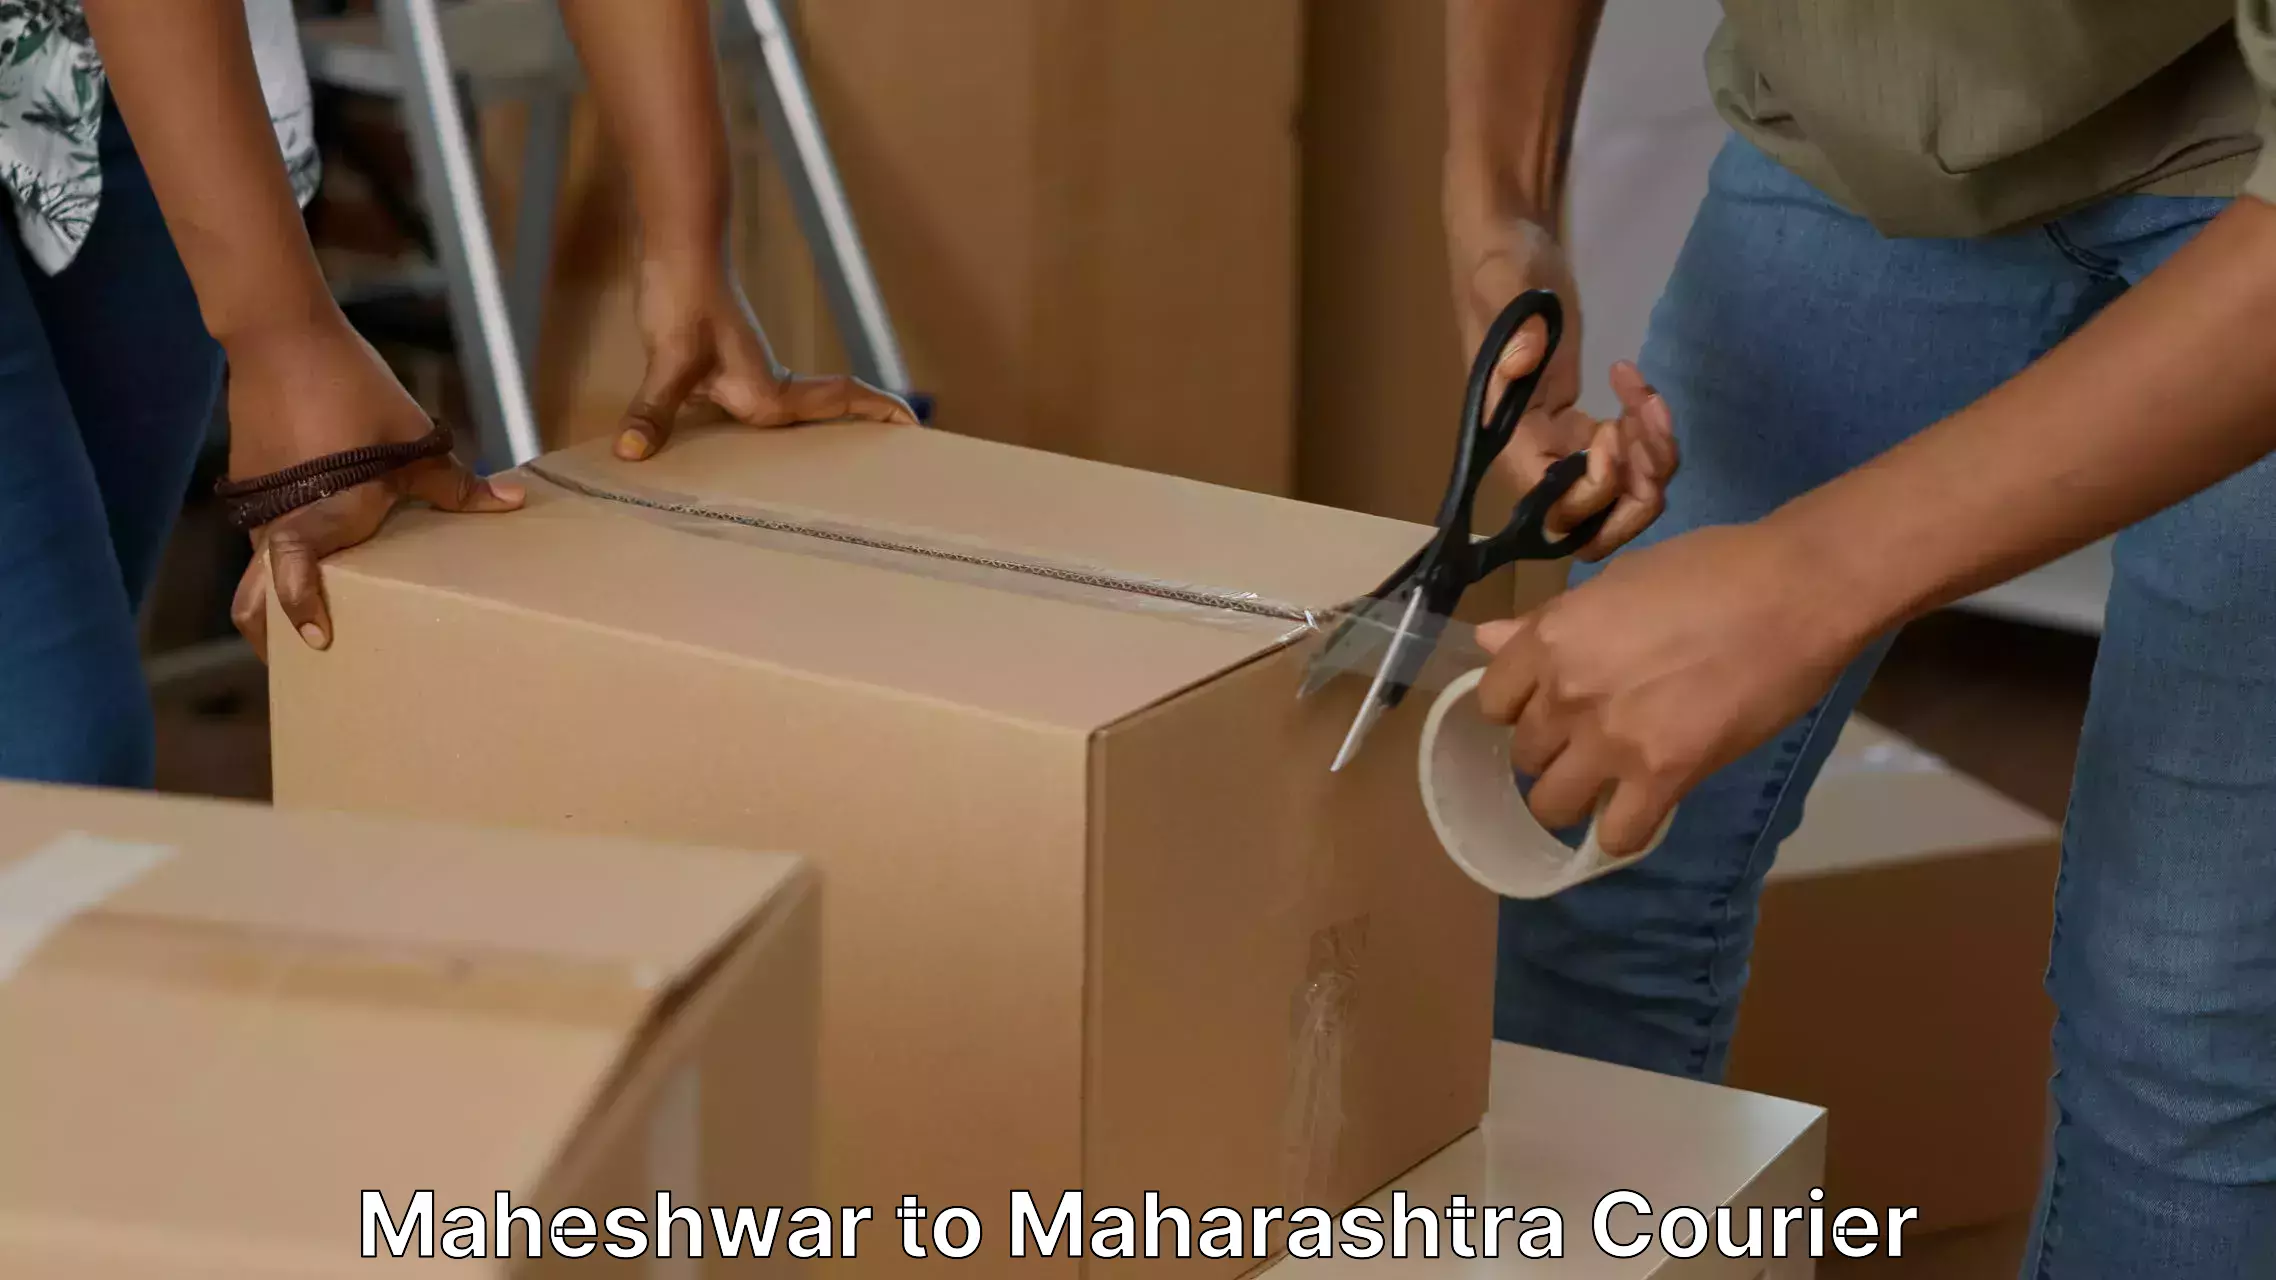 Budget-friendly movers in Maheshwar to Andheri